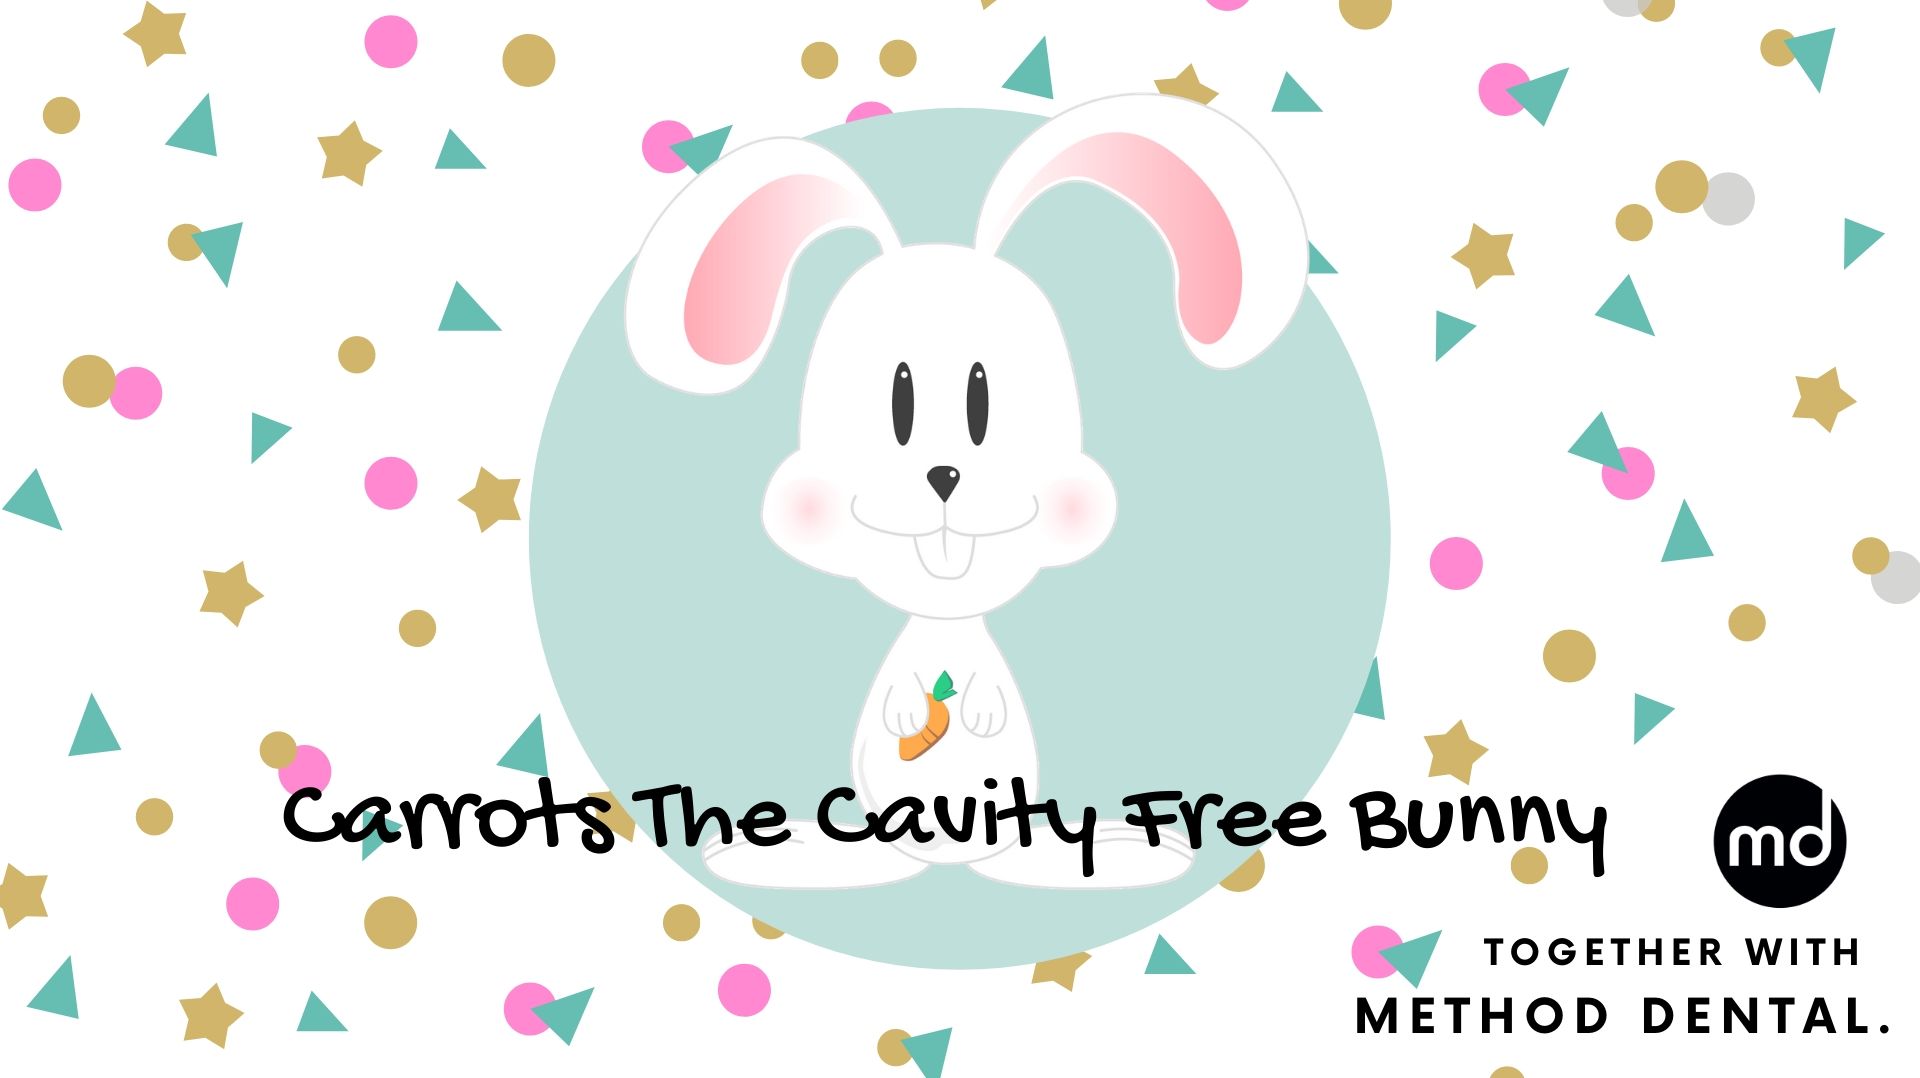 Carrots the Cavity Free Bunny together with Method Dental, introduced at St. Columba's Wilston